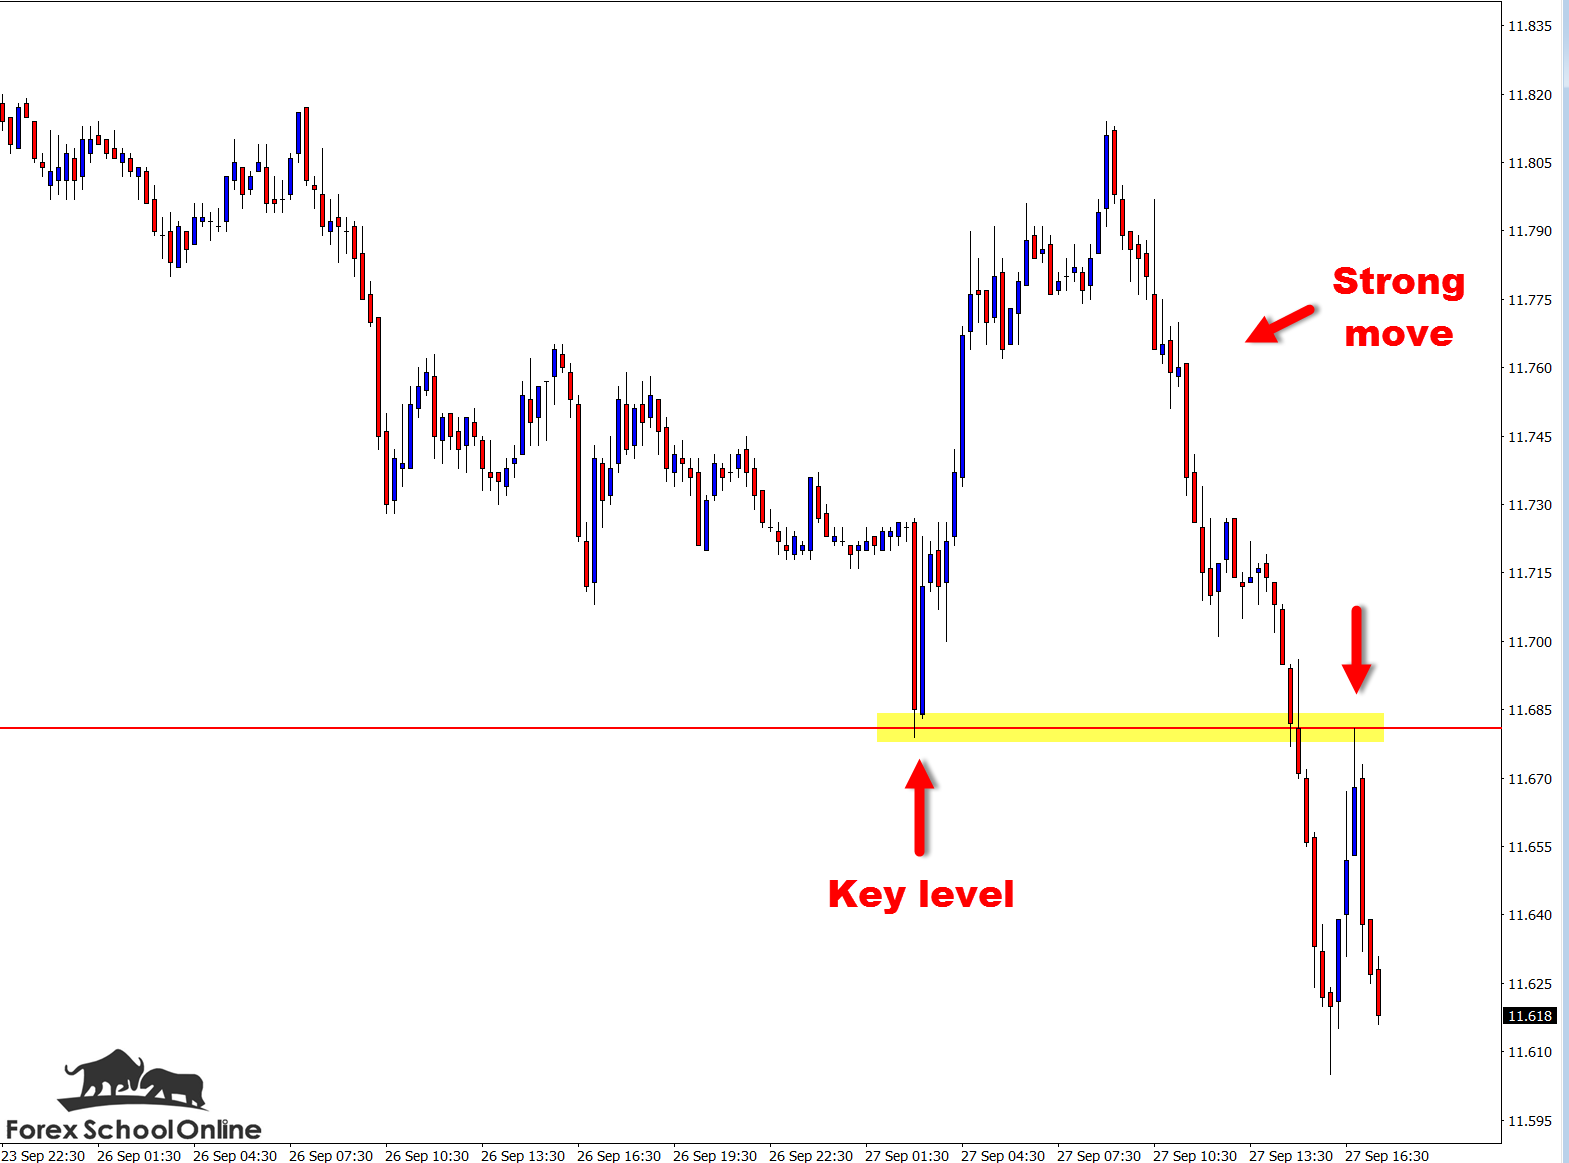 Intraday price action trading